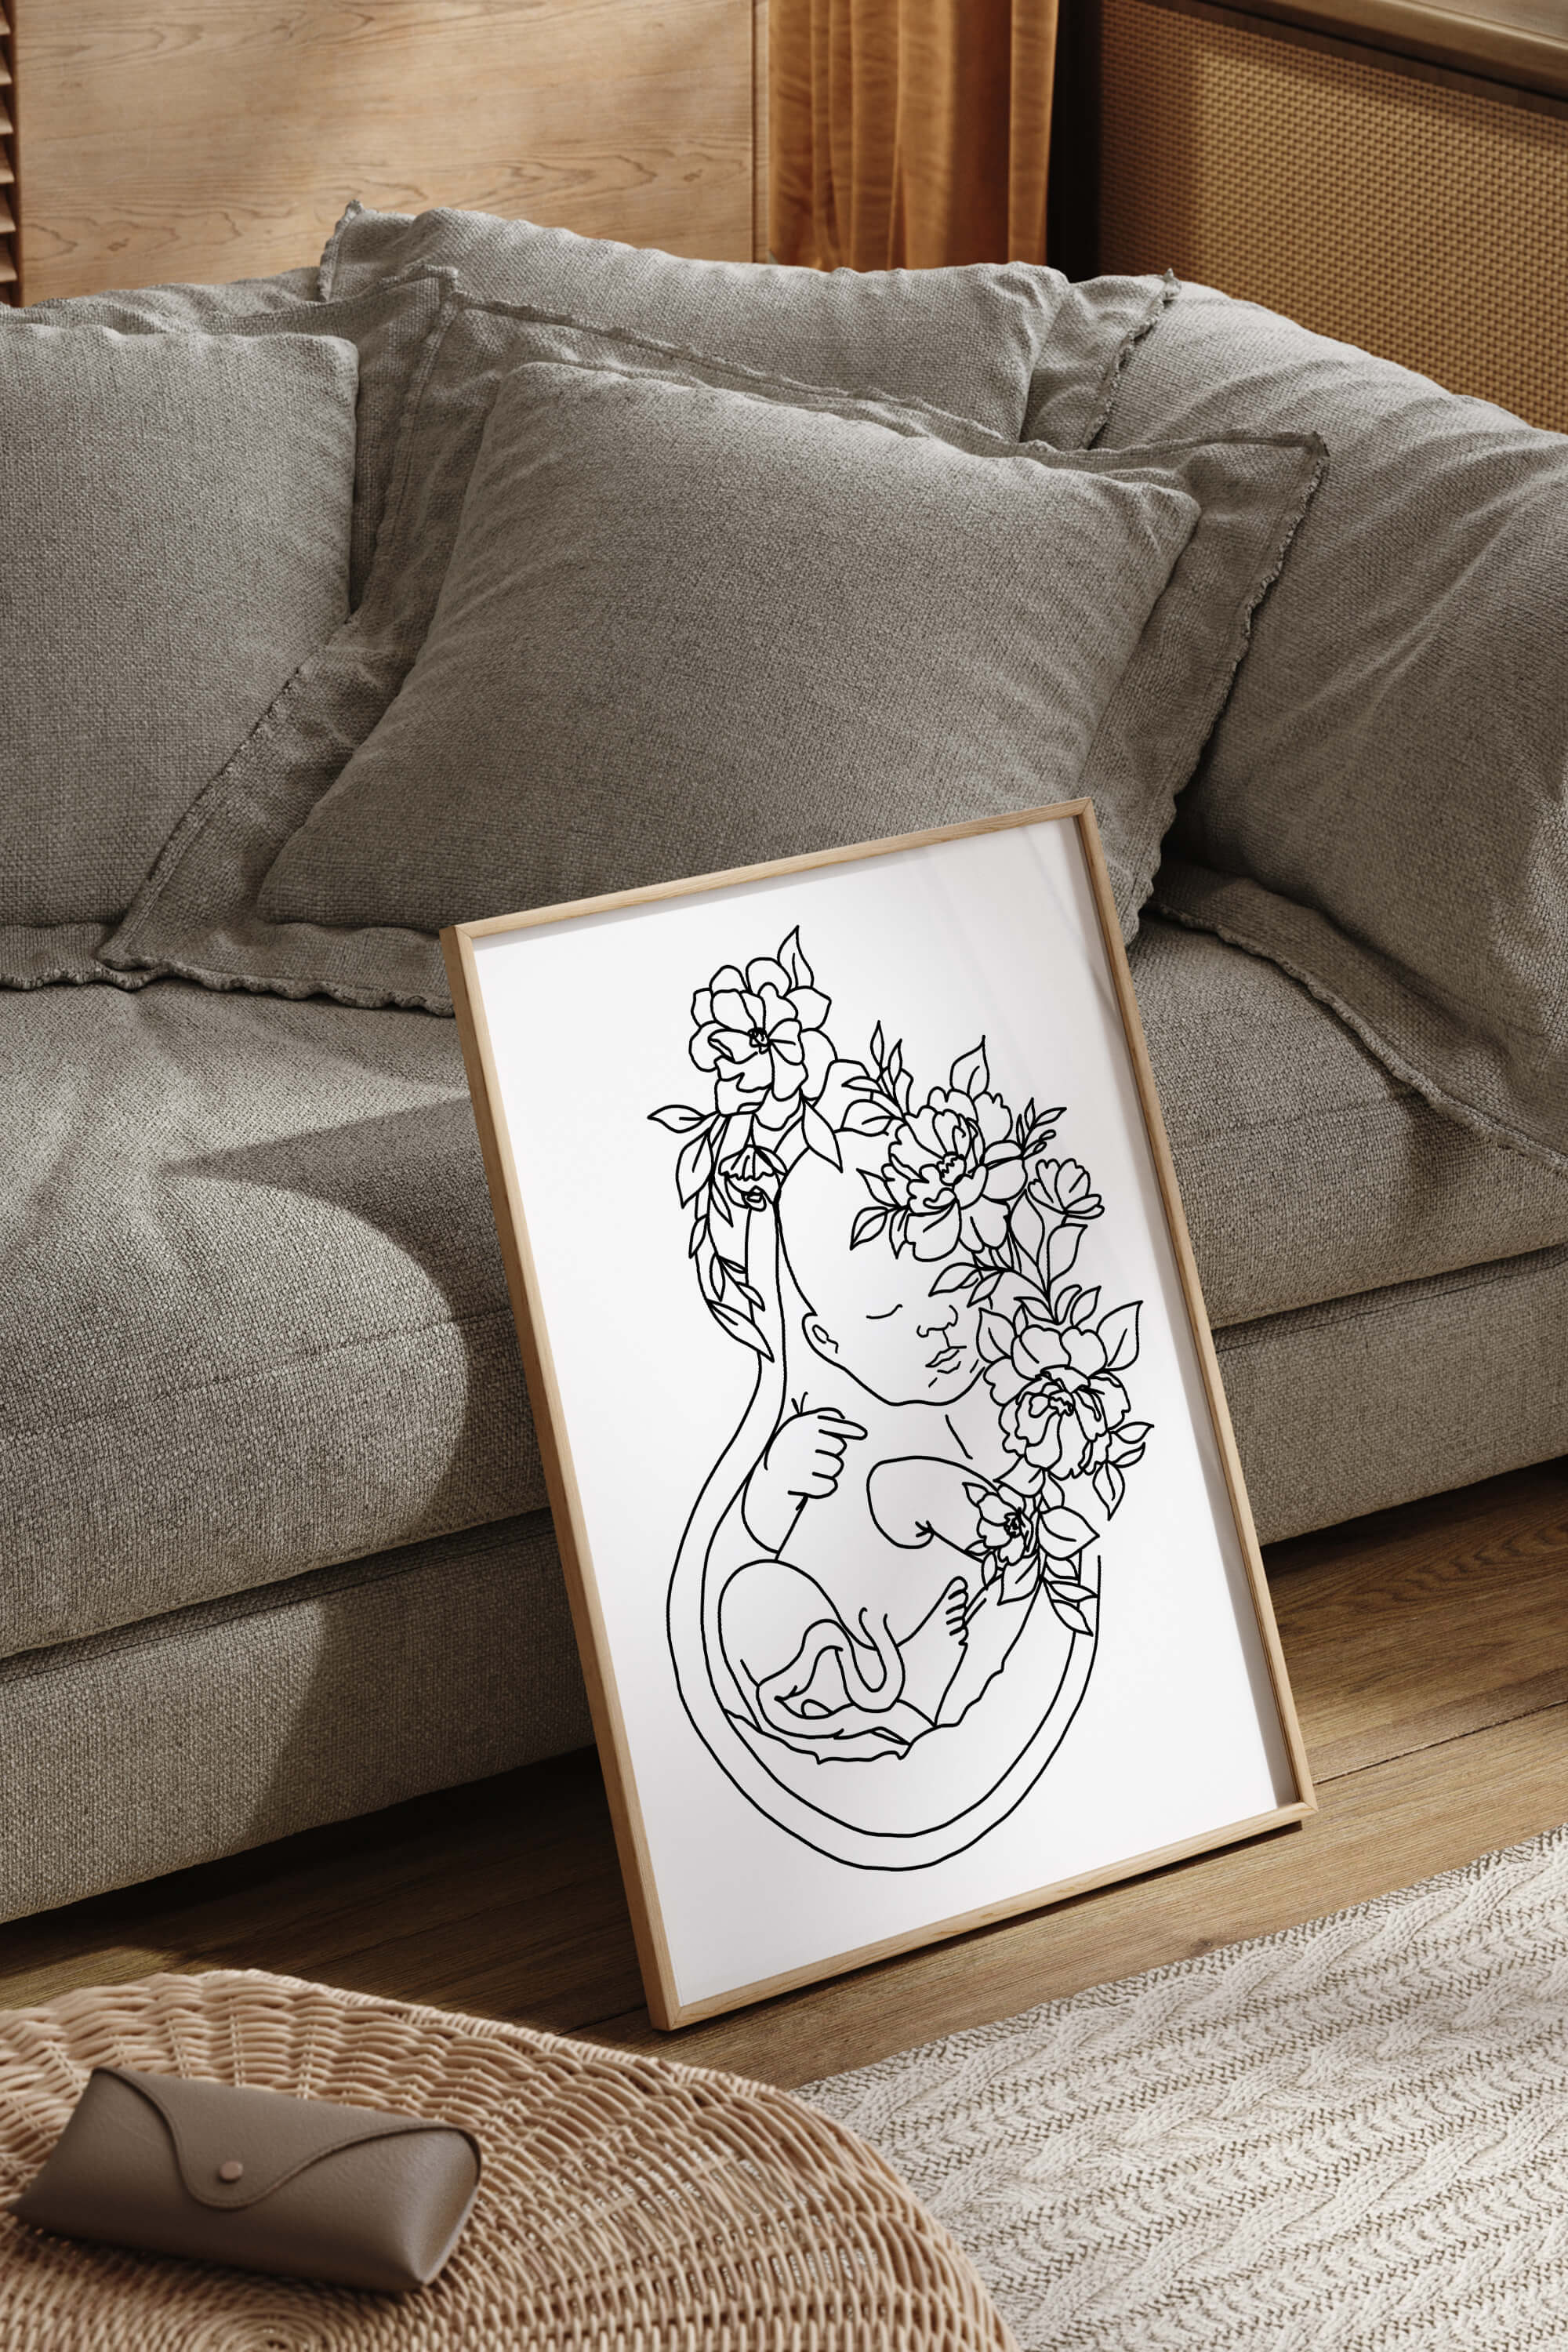 Floral uterus art print, adding sensuality and elegance to your living space. Hang this captivating design in your nursery or living room to elevate the atmosphere with the beauty of nature's grace.